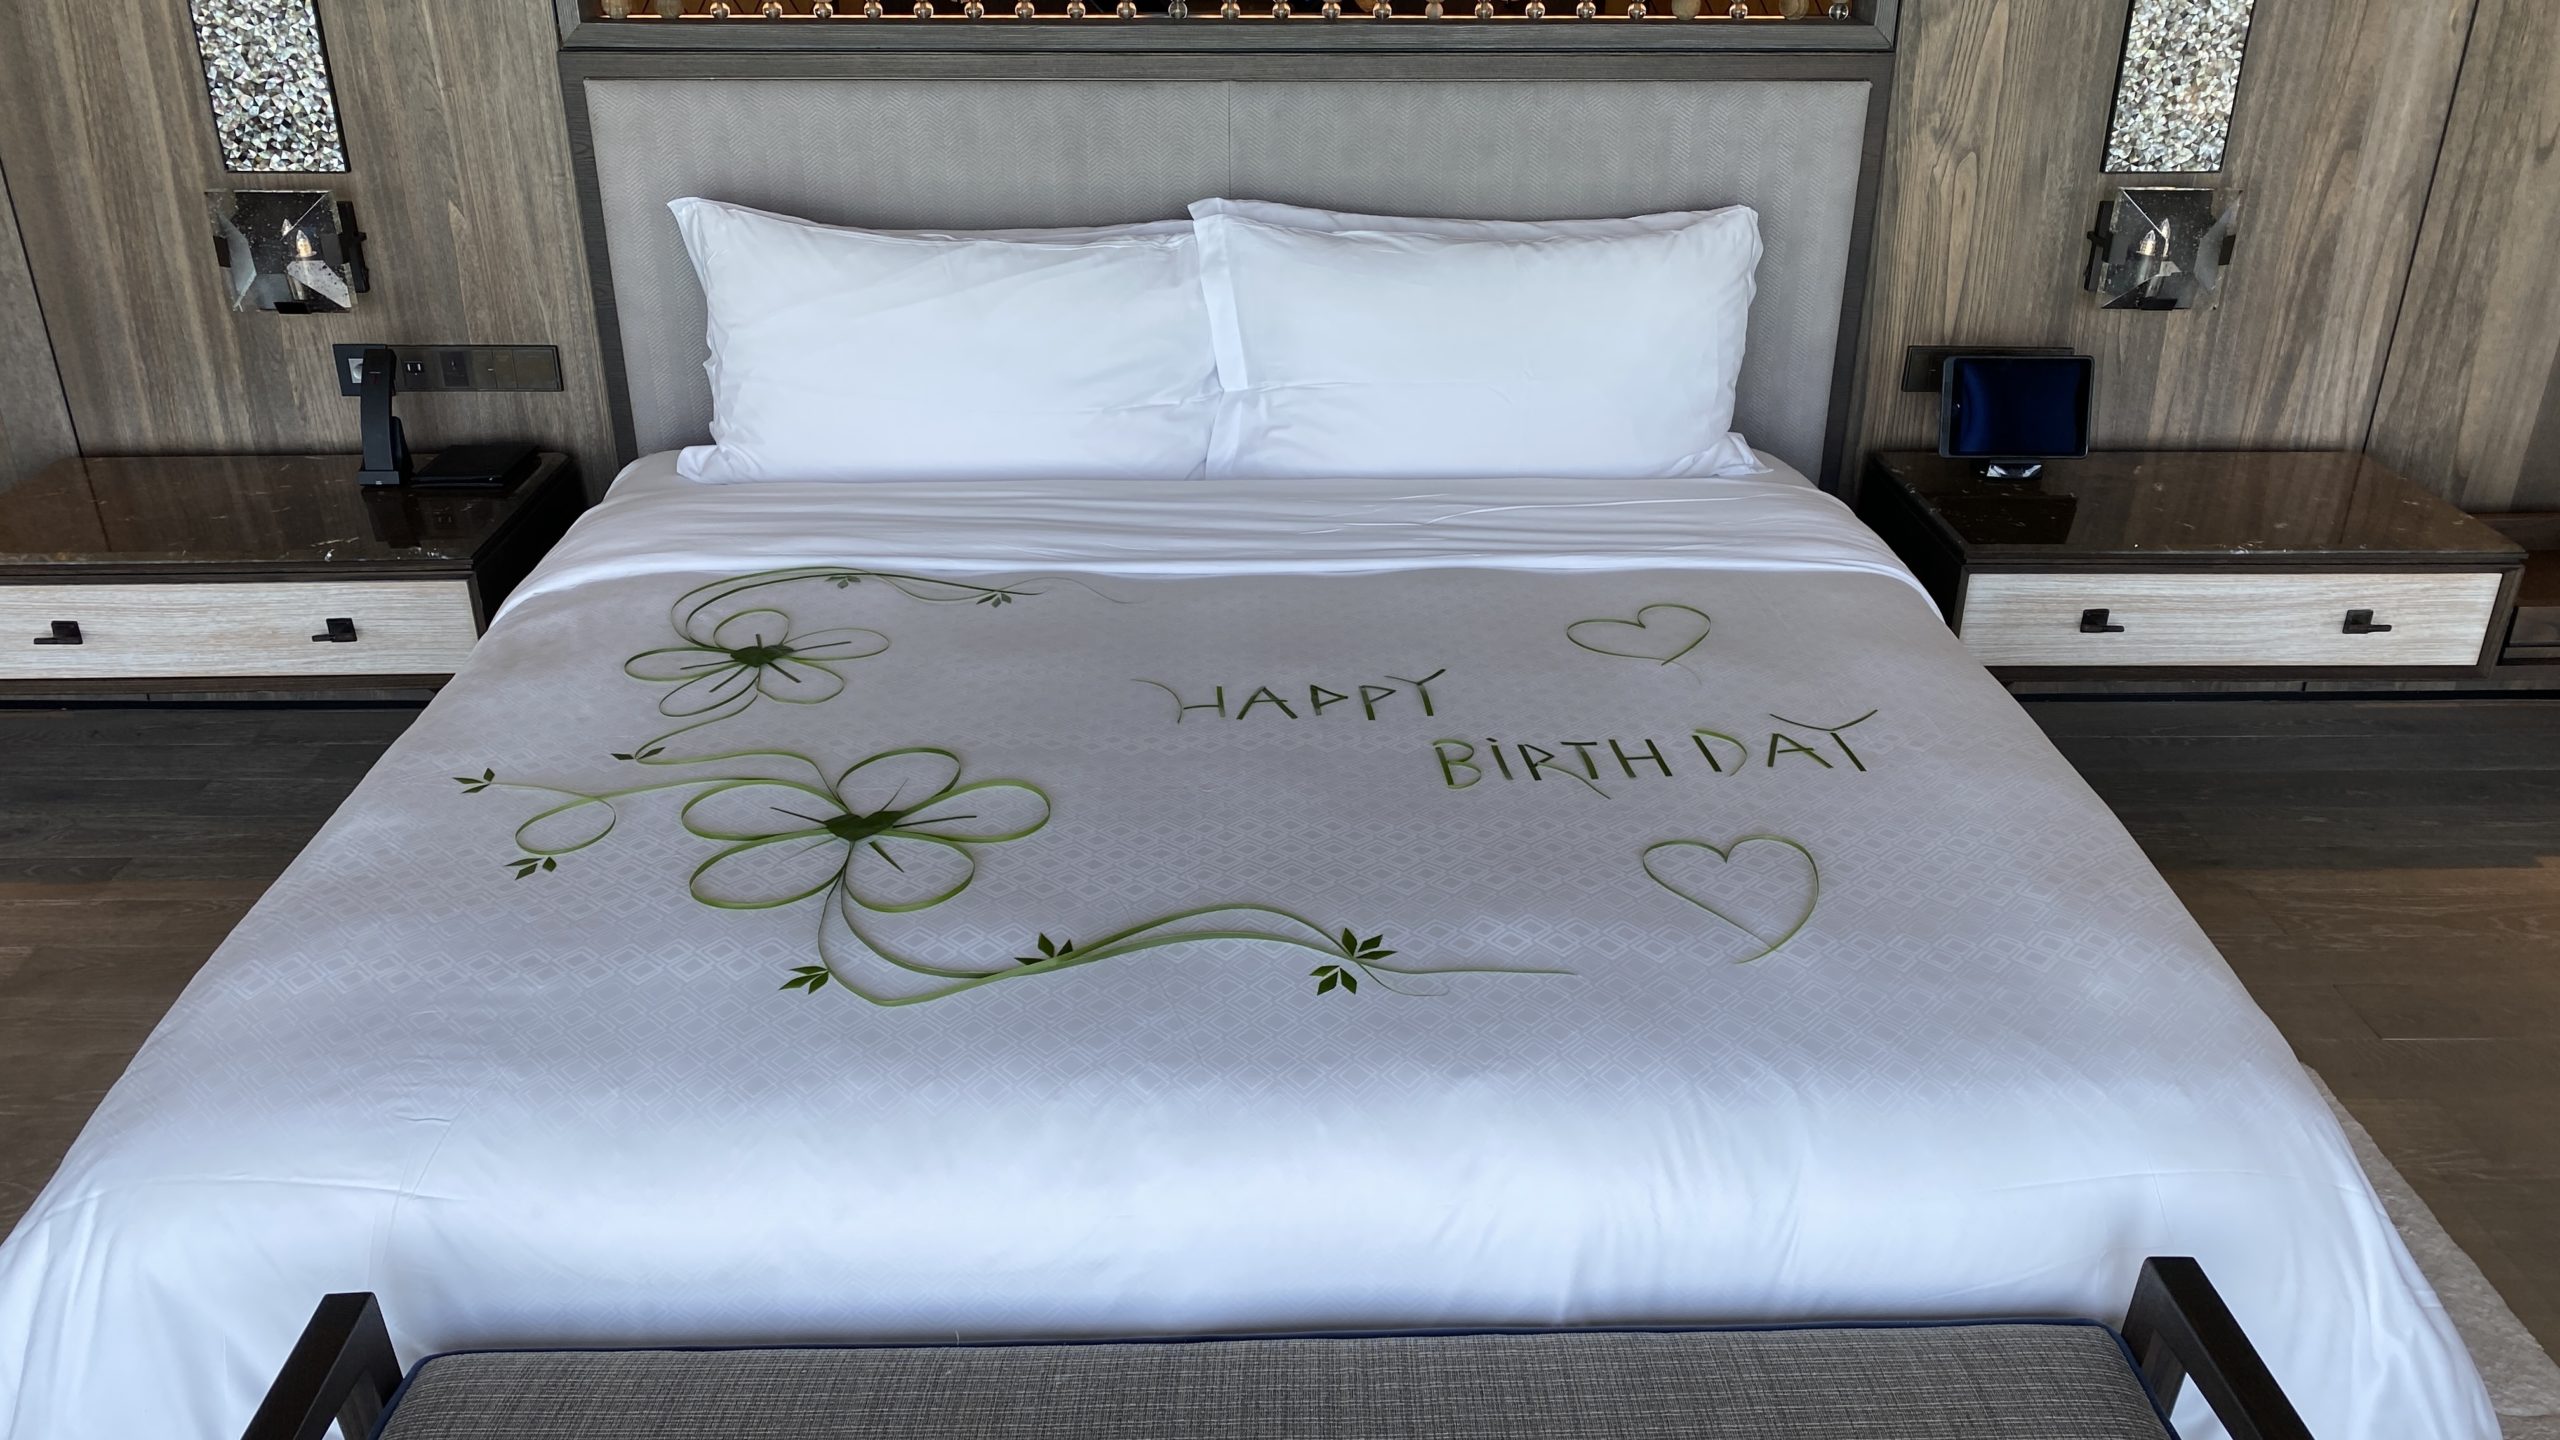 a bed with a white sheet with green flowers and hearts